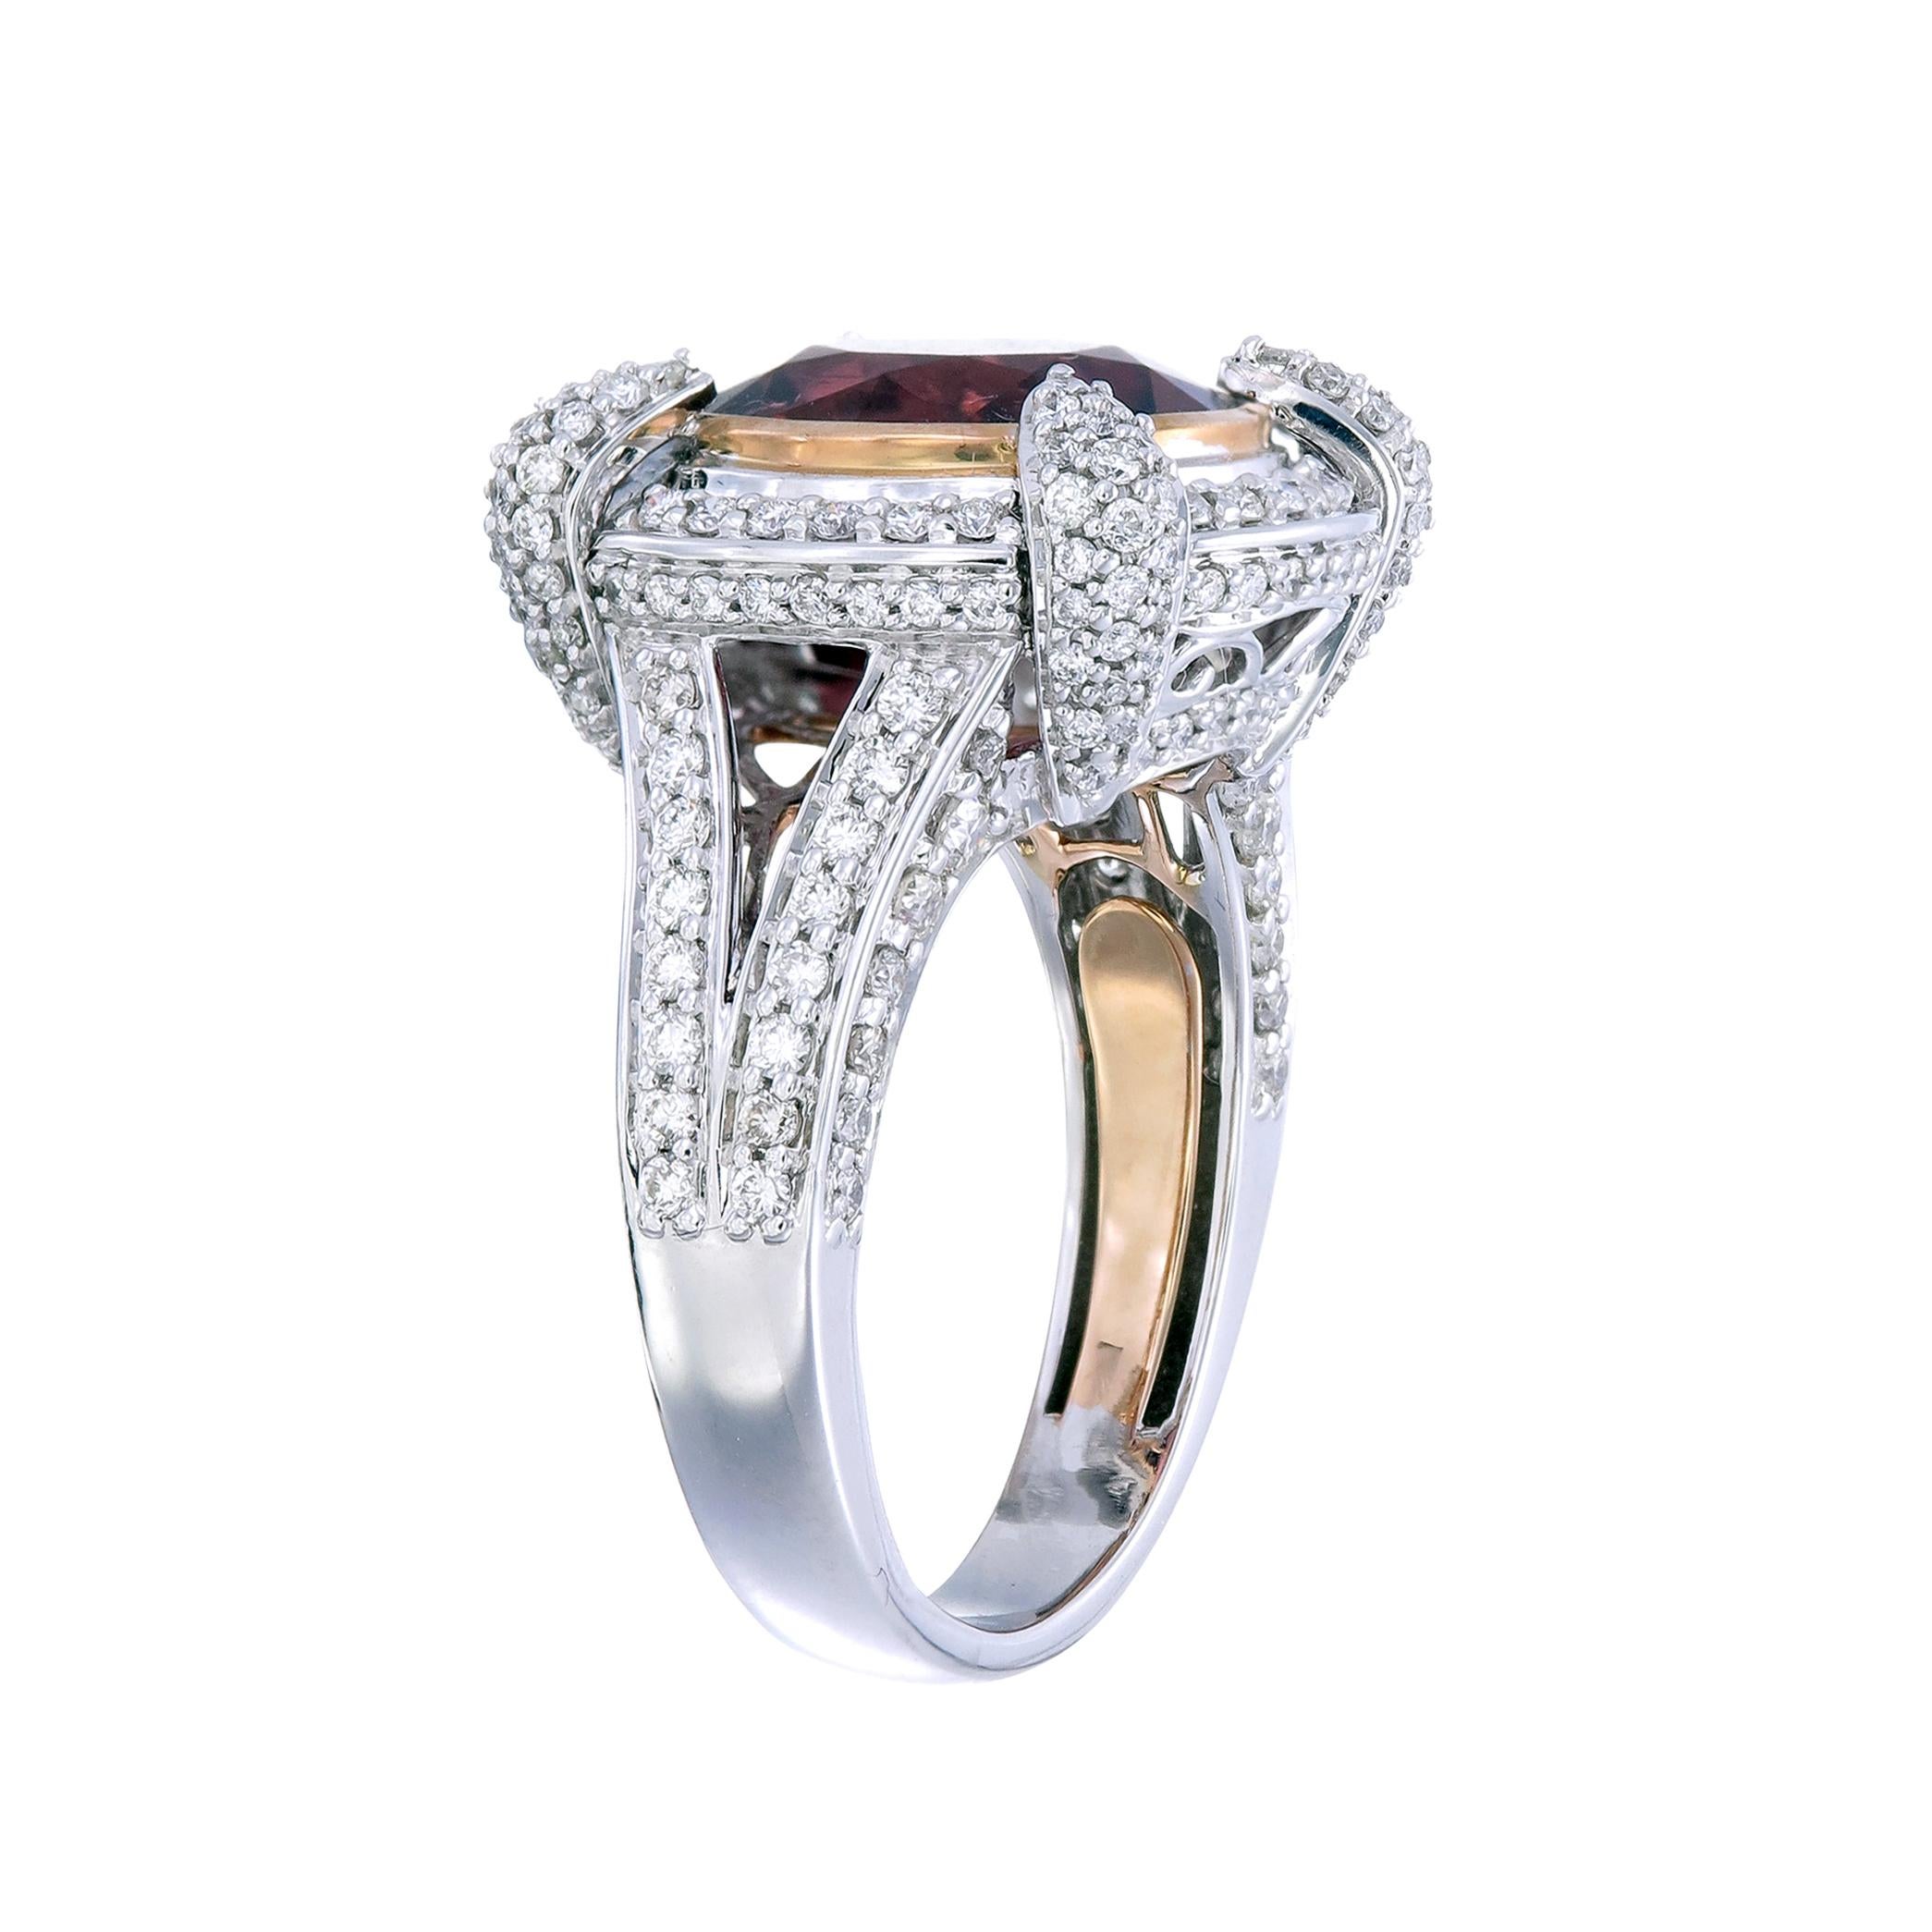 A round 4.81-carat fancy red tourmaline in a deep lush hue centers this 18k gold and palladium ring paved with 1.24-carats of diamonds. This round stone surrounded by a halo setting would make a wonderful engagement ring for a bride who has the